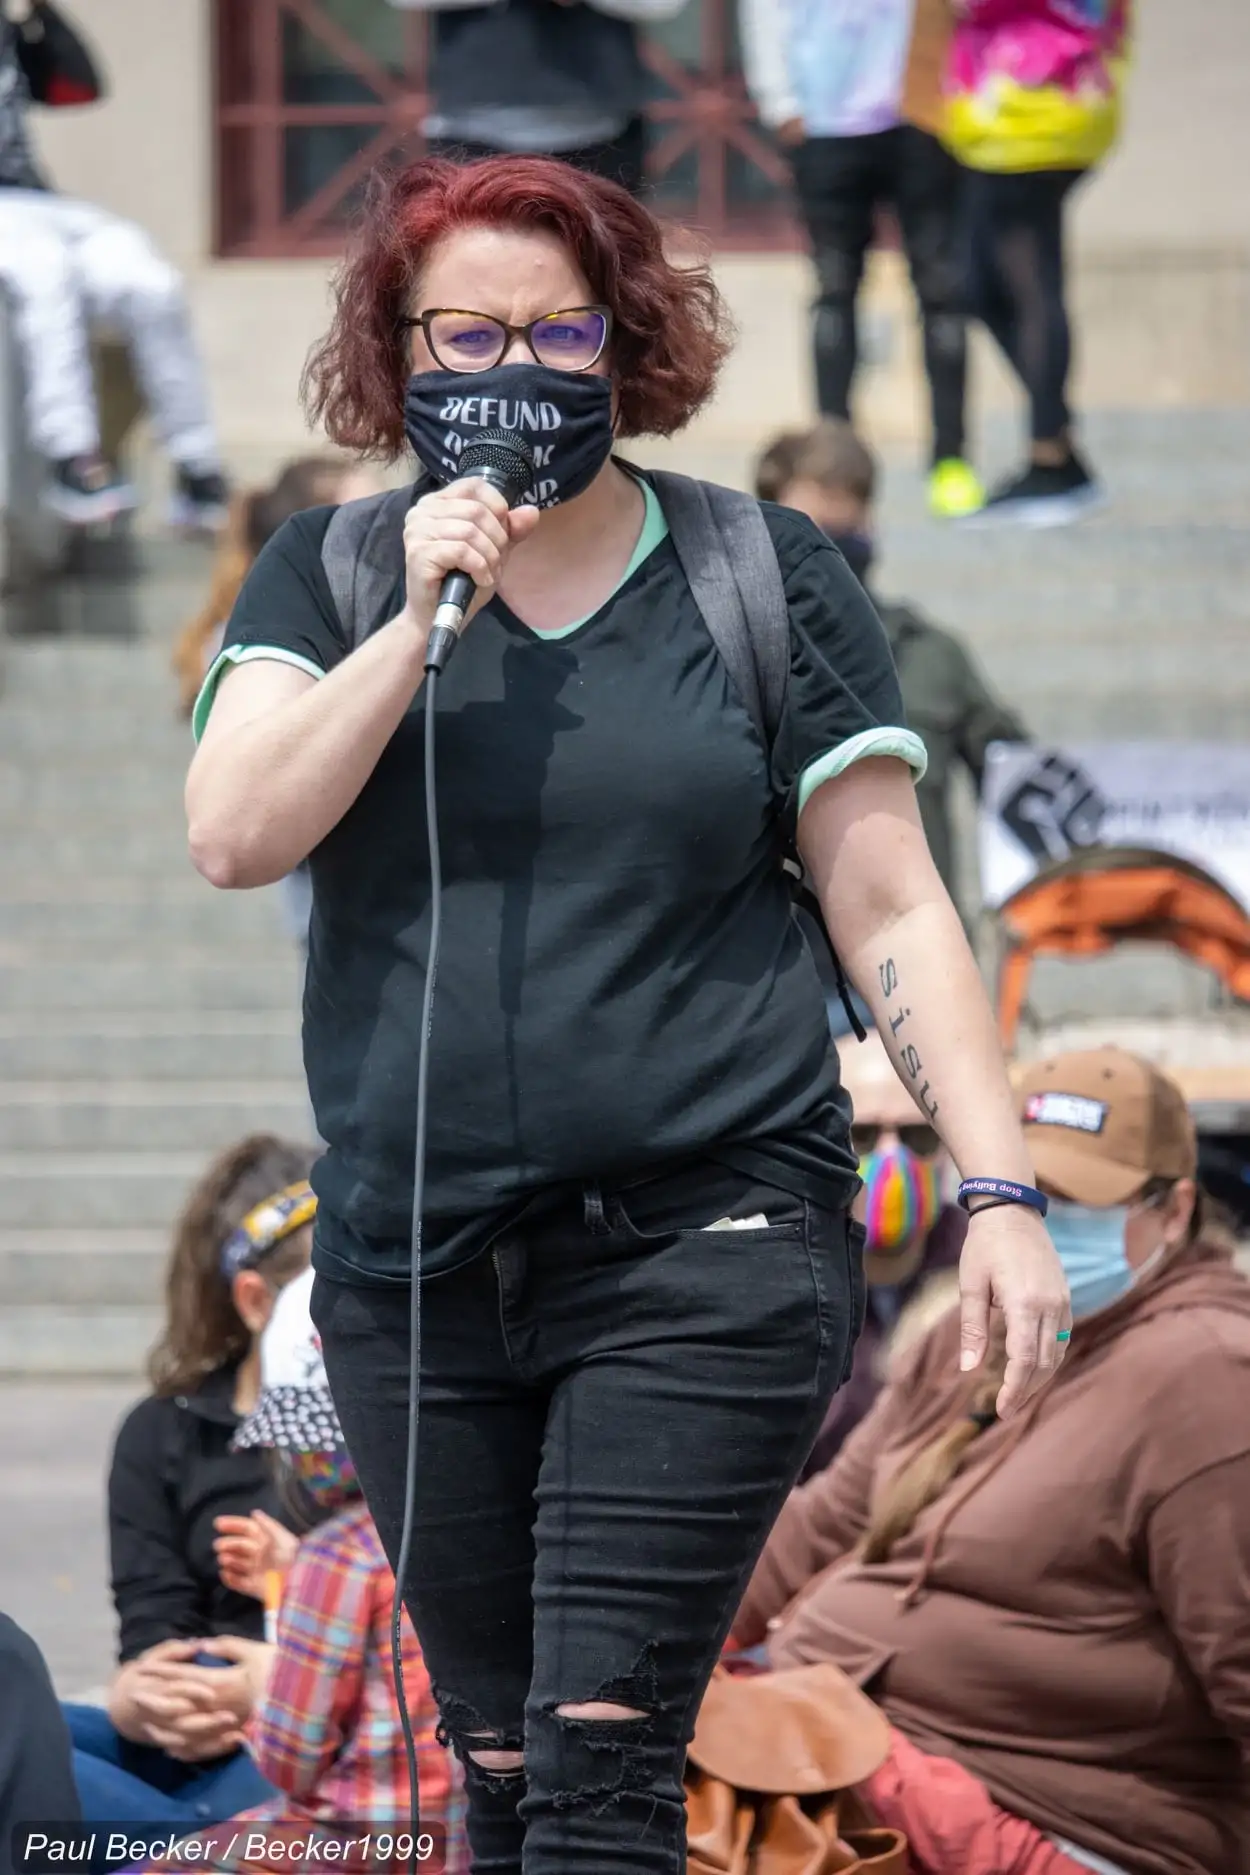 a photo of me, a white woman wearing a black tee and black pants, a black mask that says “disarm, disband, defund the police” with the words somewhat obscured. my hair is short, just to the ears, darker red, and I’m wearing black rimmed glasses, somewhat scowly. There are people behind me on steps in the background and a BLM fist on a sign.